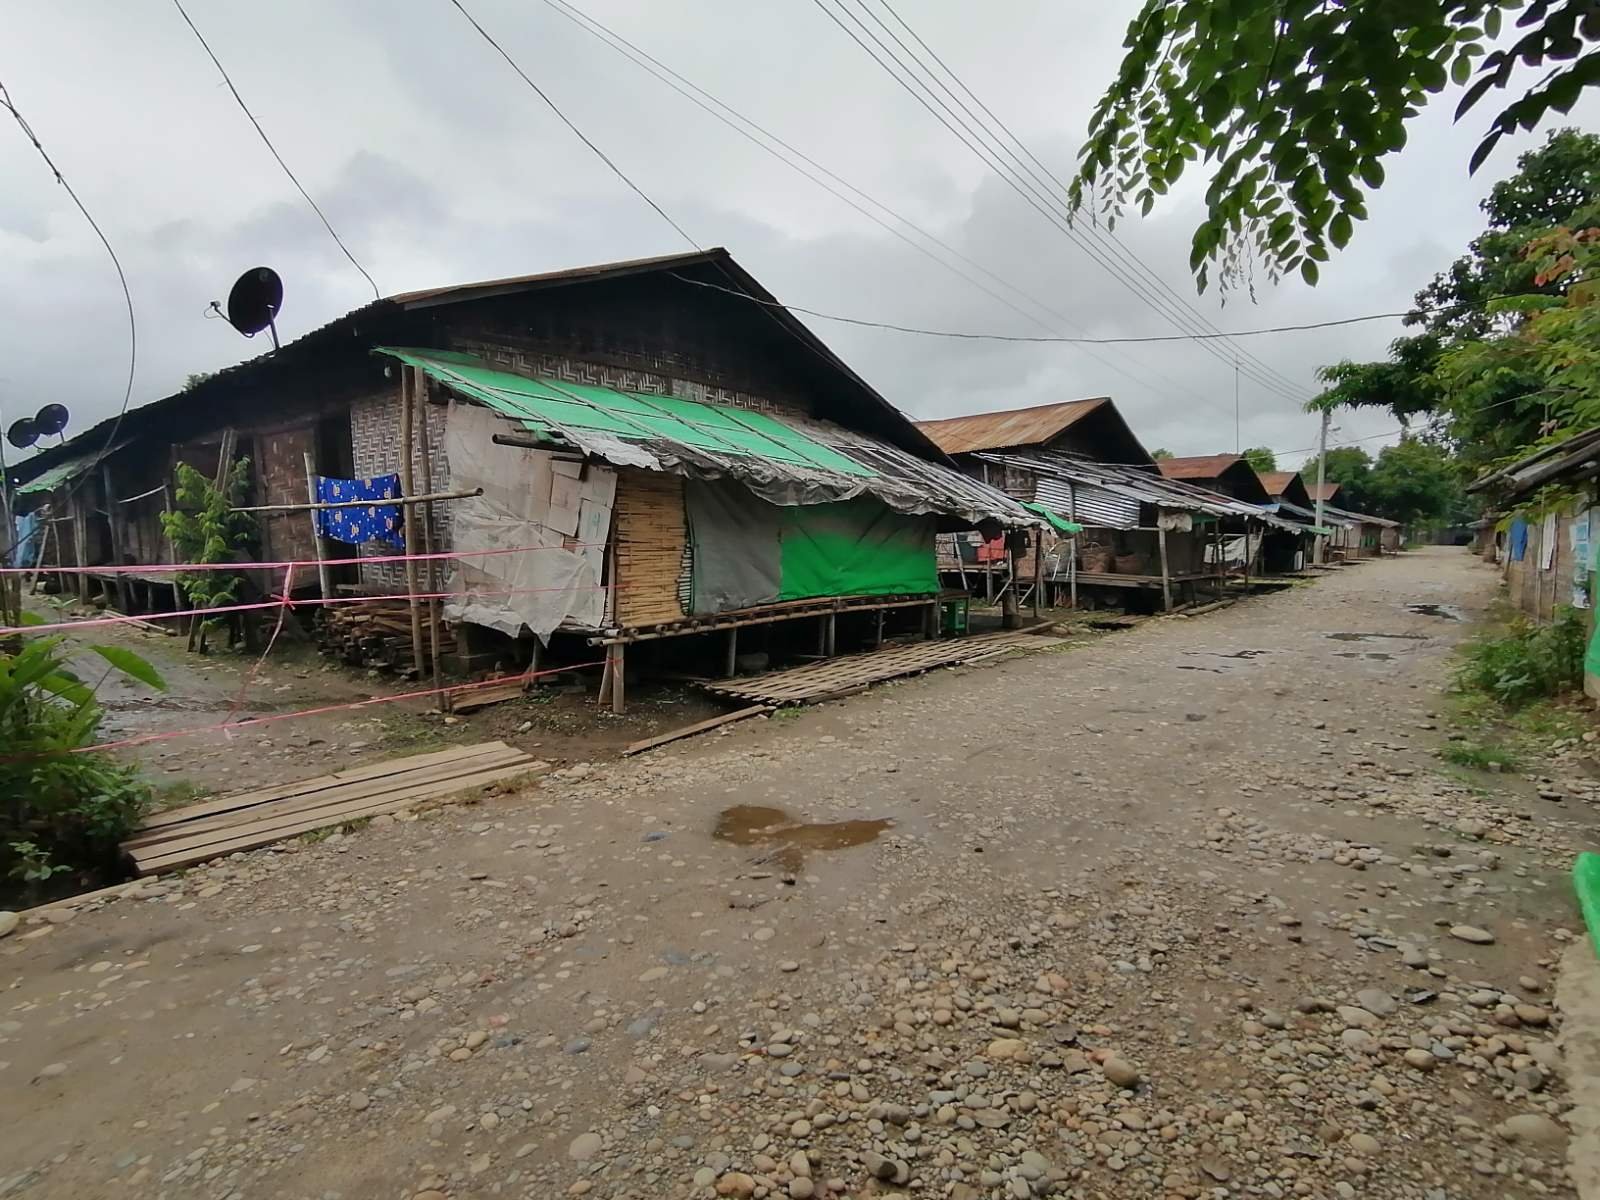 Residents of ‘Locked Down’ Camp in Kachin State Facing Food Insecurity